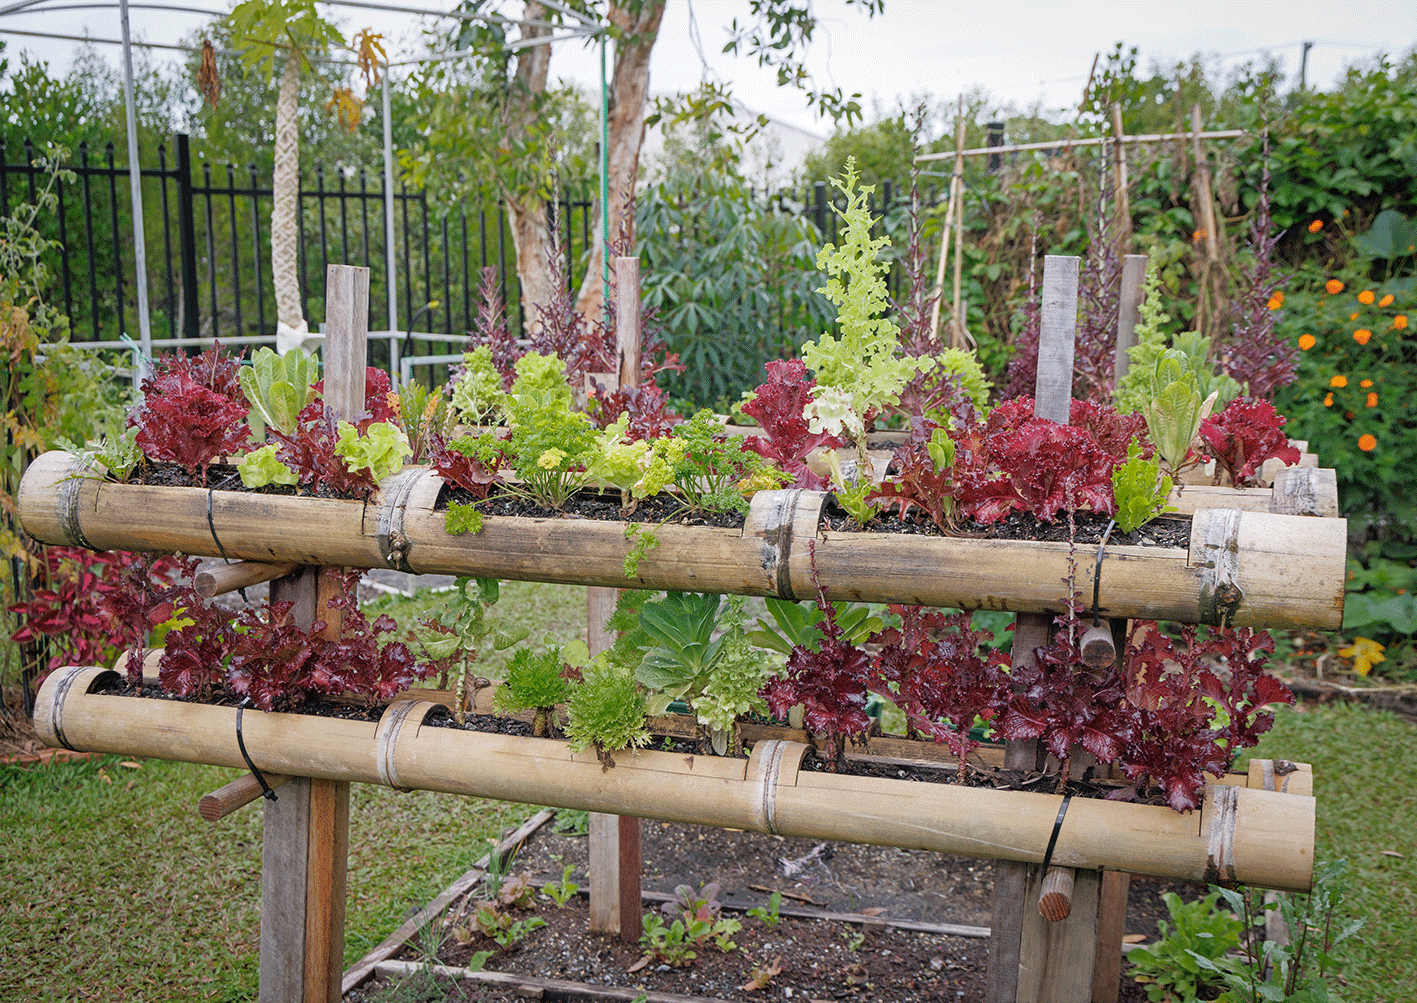 Lettuce varieties growing in raised bed made from reclaimed bamboo